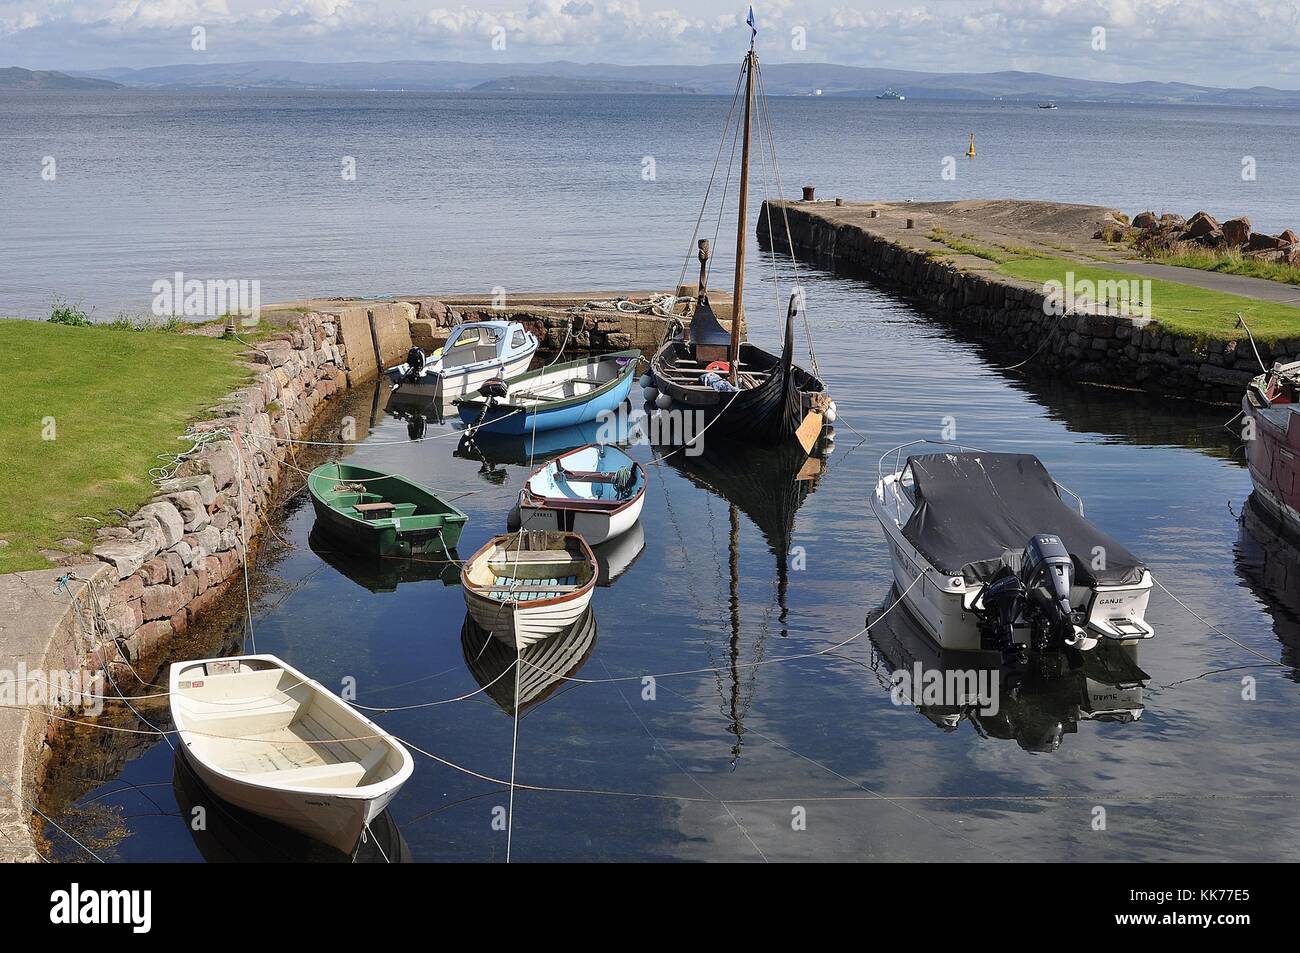 SMALL HARBOUR AT CORRIE, ISLE OF ARRAN, SCOTLAND Stock Photo